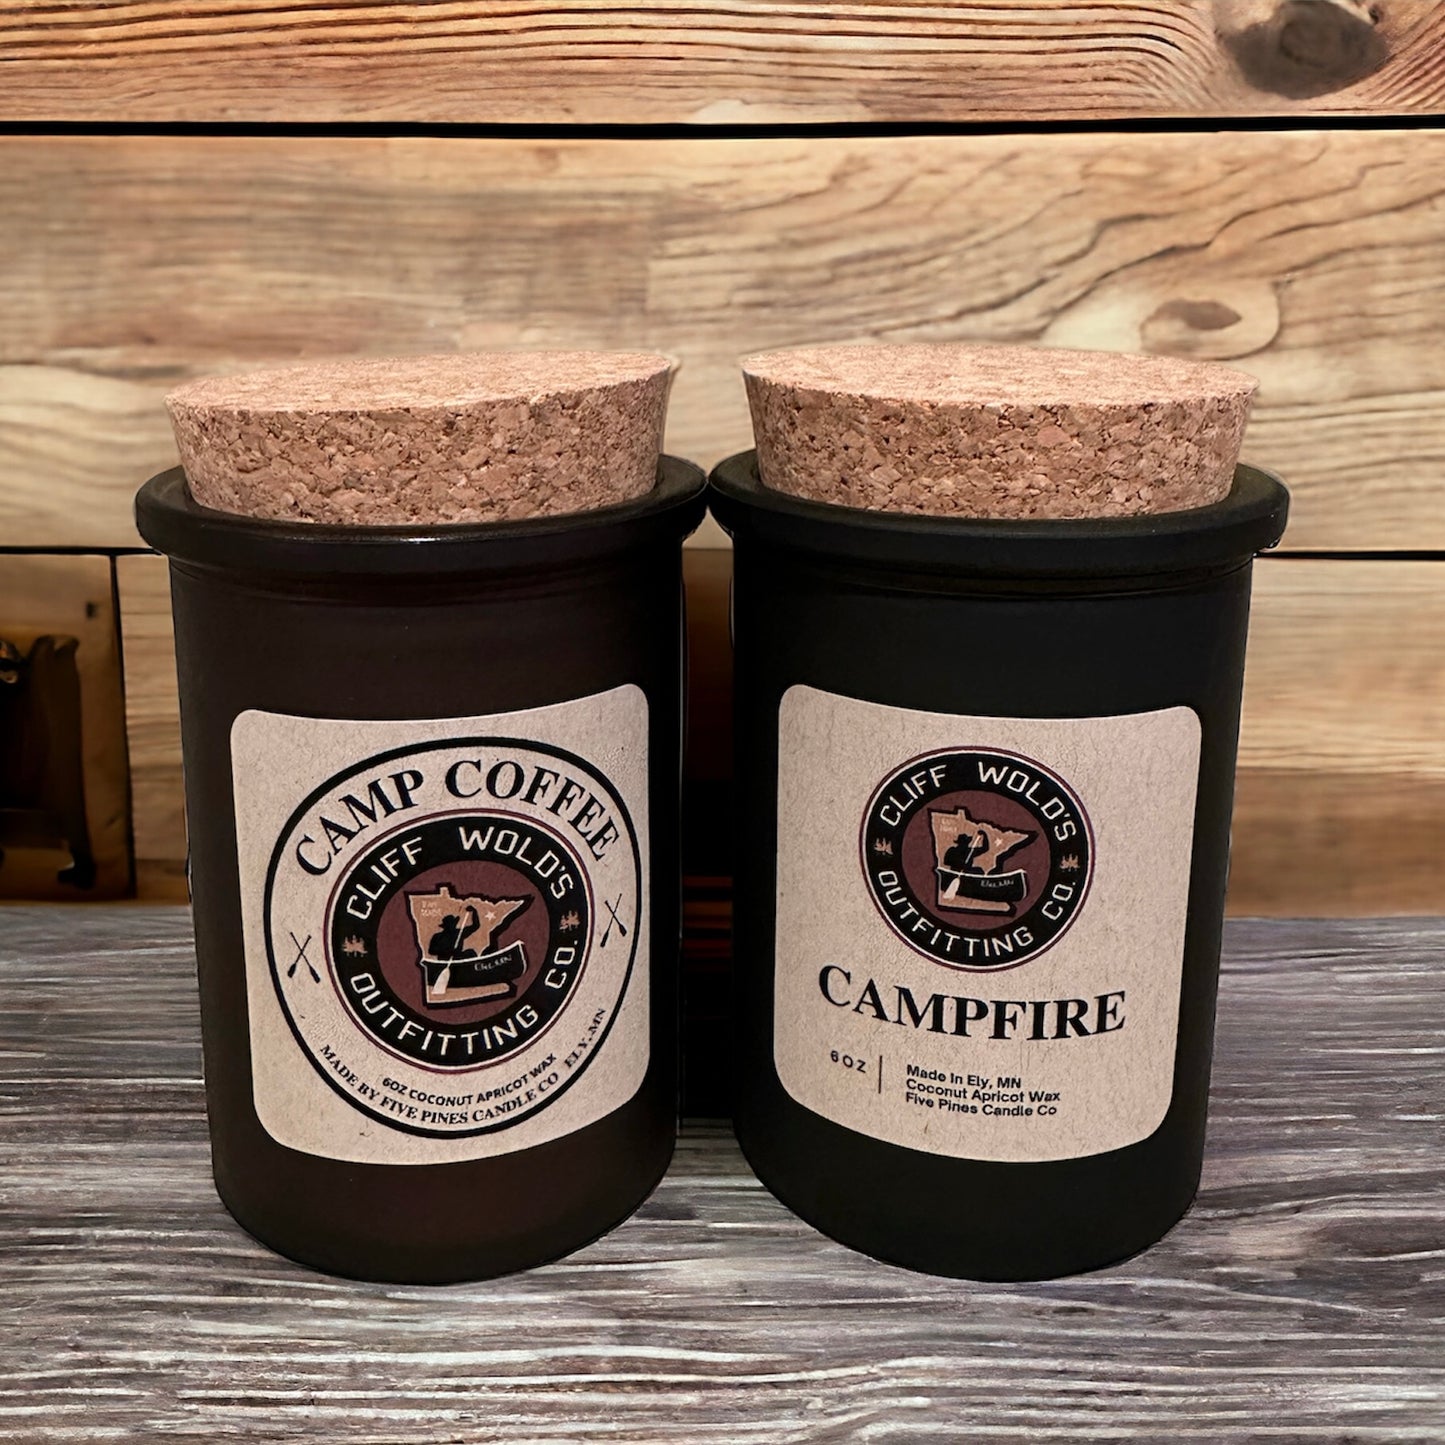 Cliff Wold's Wilderness Candles